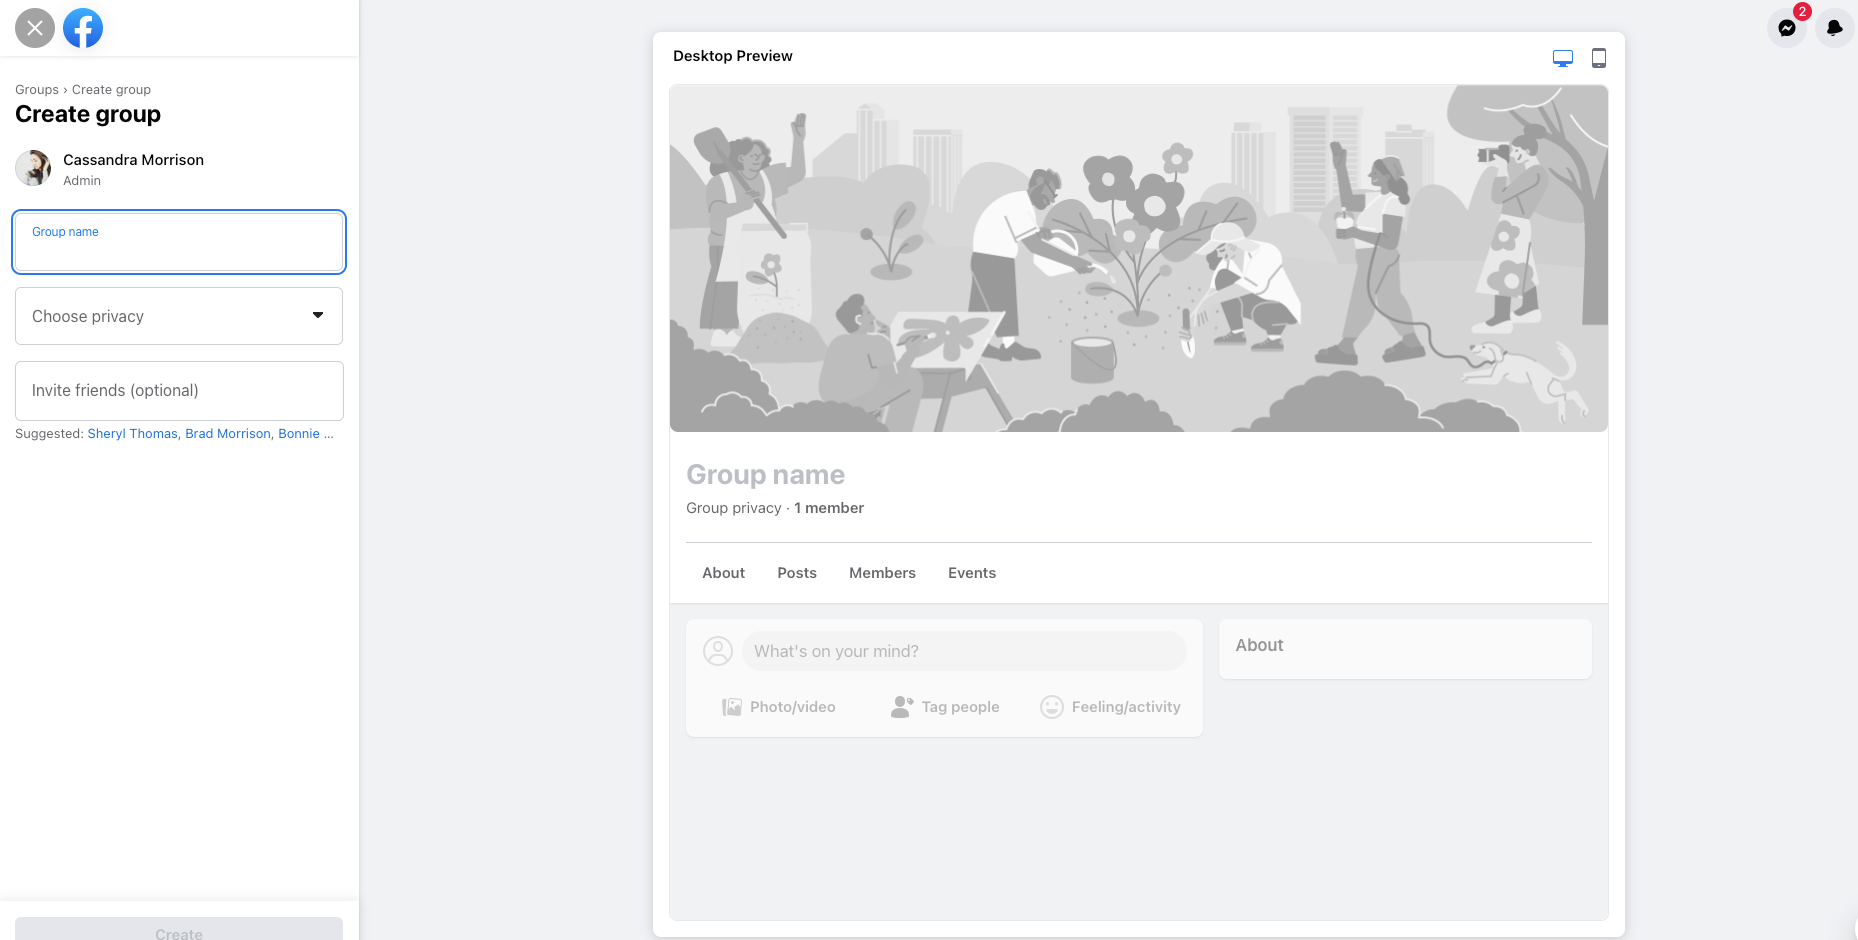 Managing a Community on Facebook: The Ultimate Guide | Nas.io